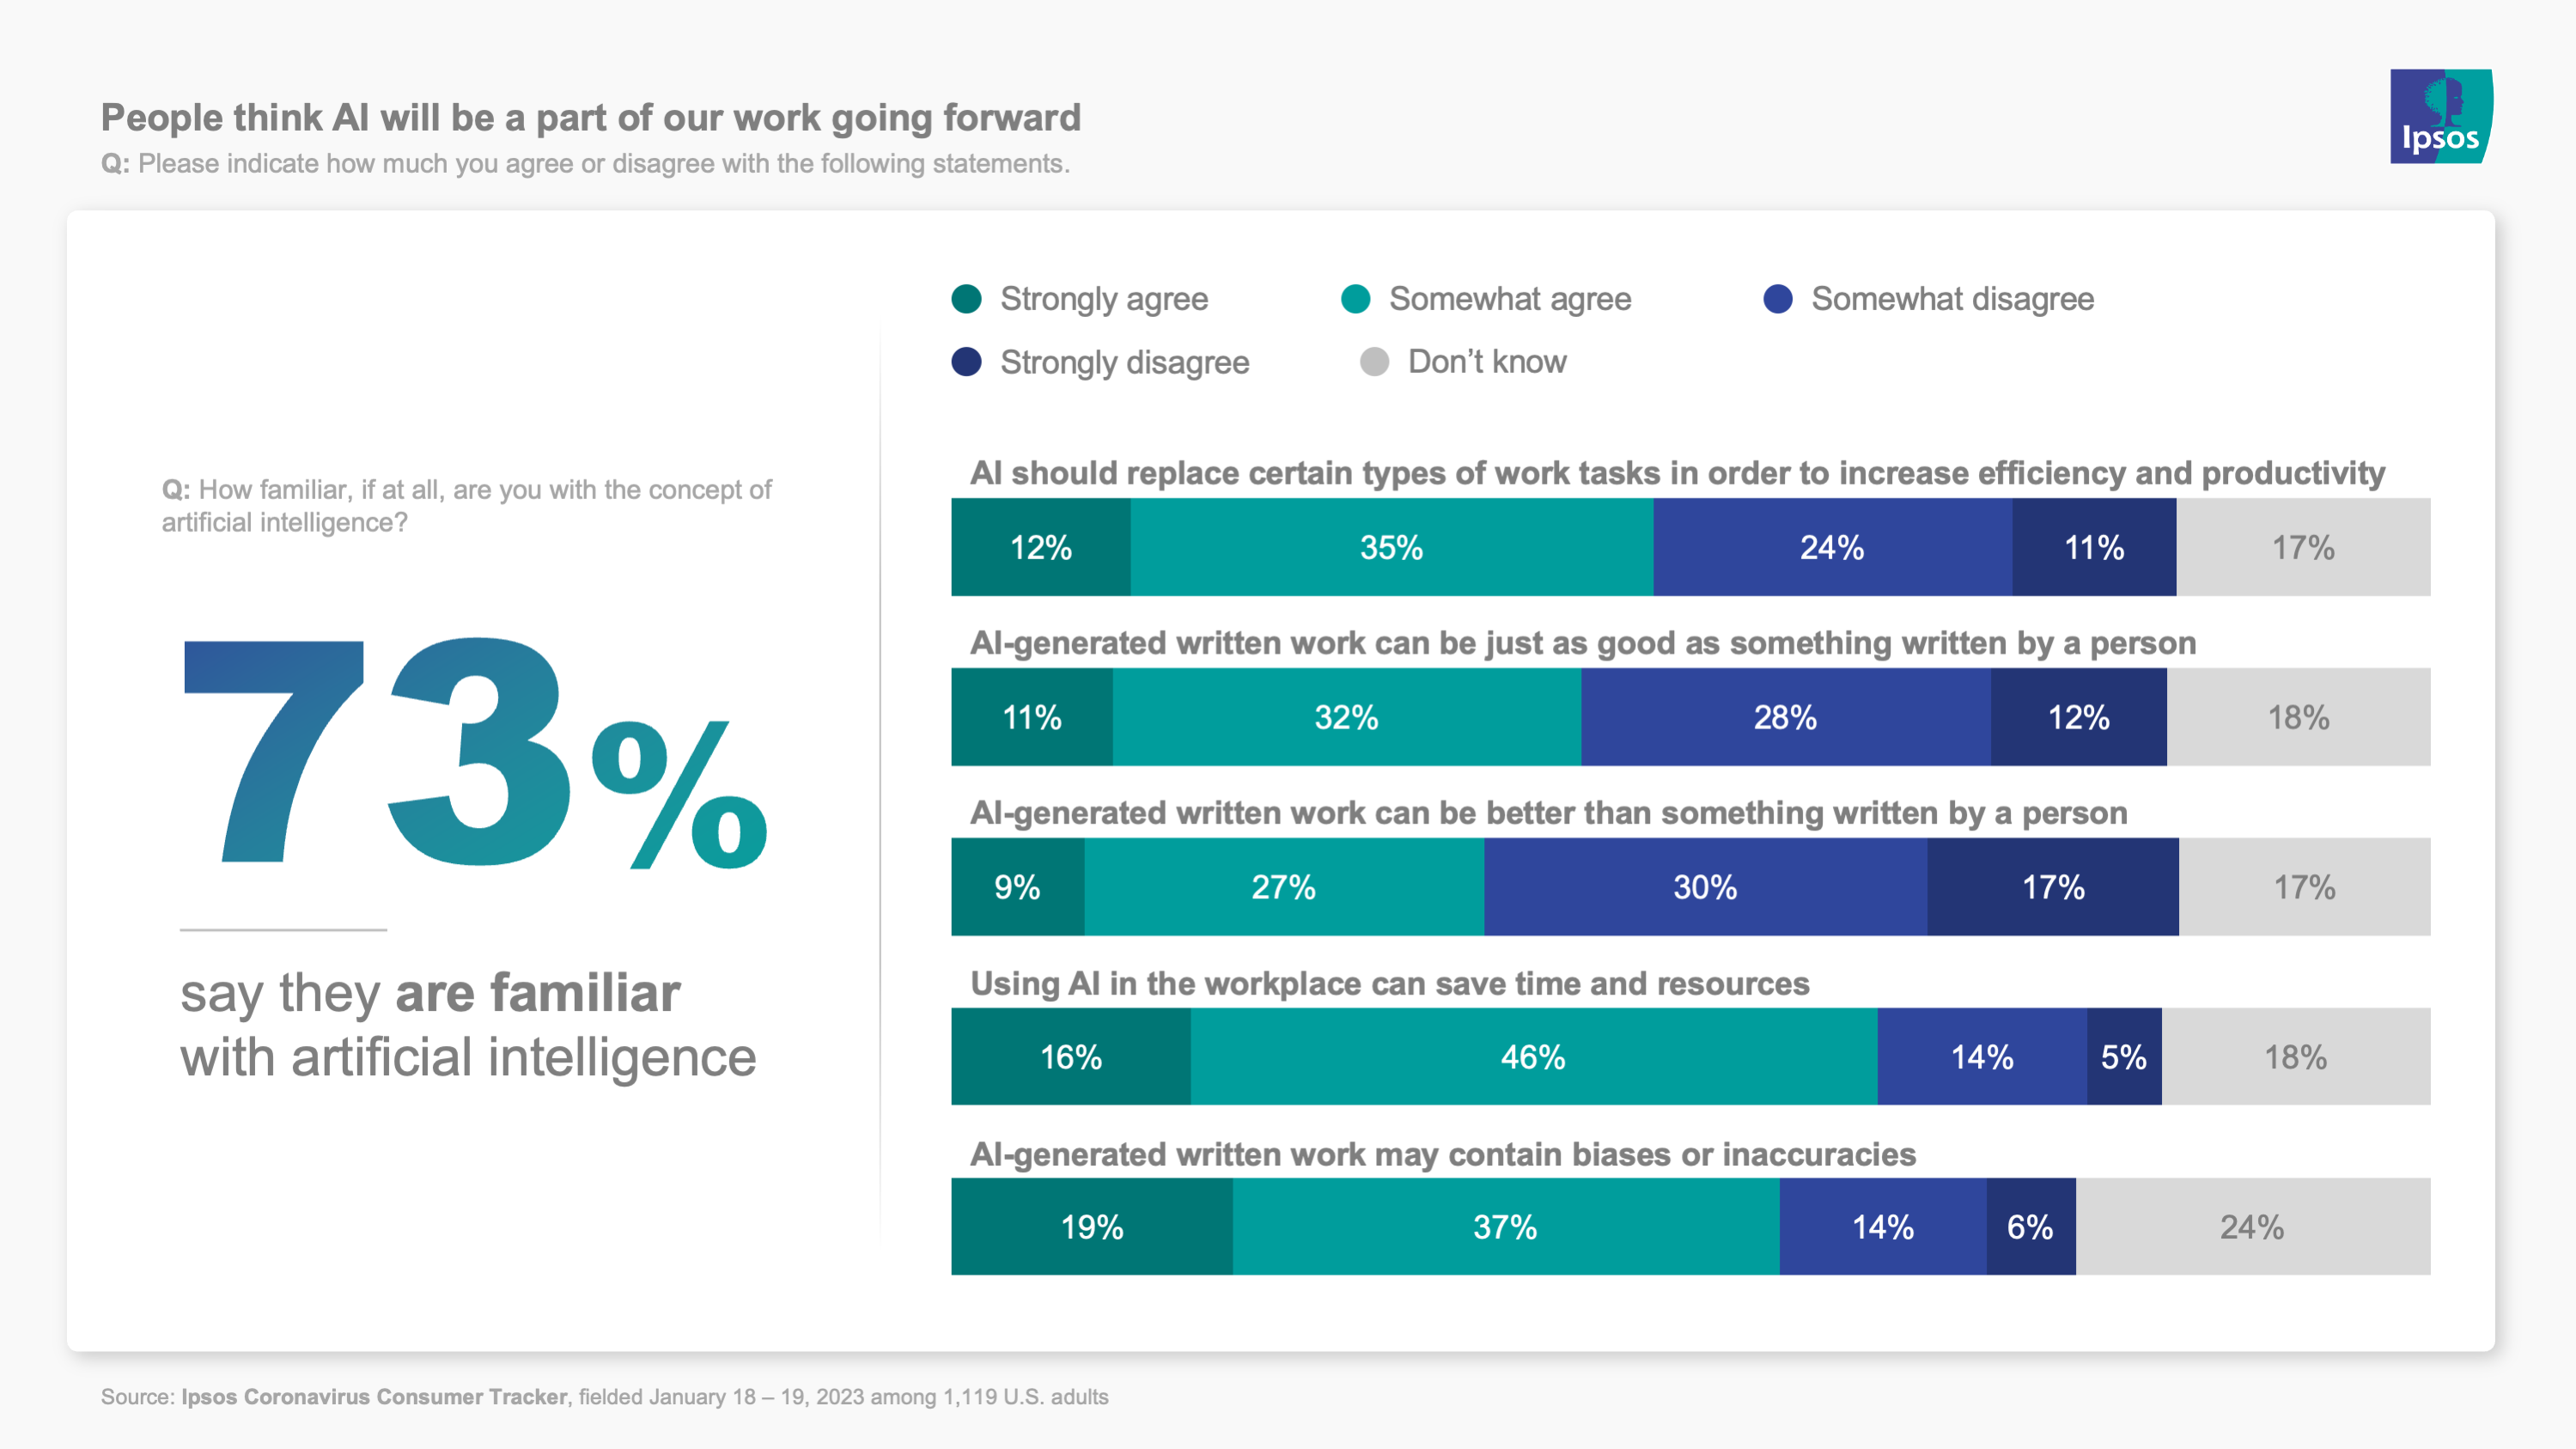 Chart showing that people think AI will be a part of our work going forward